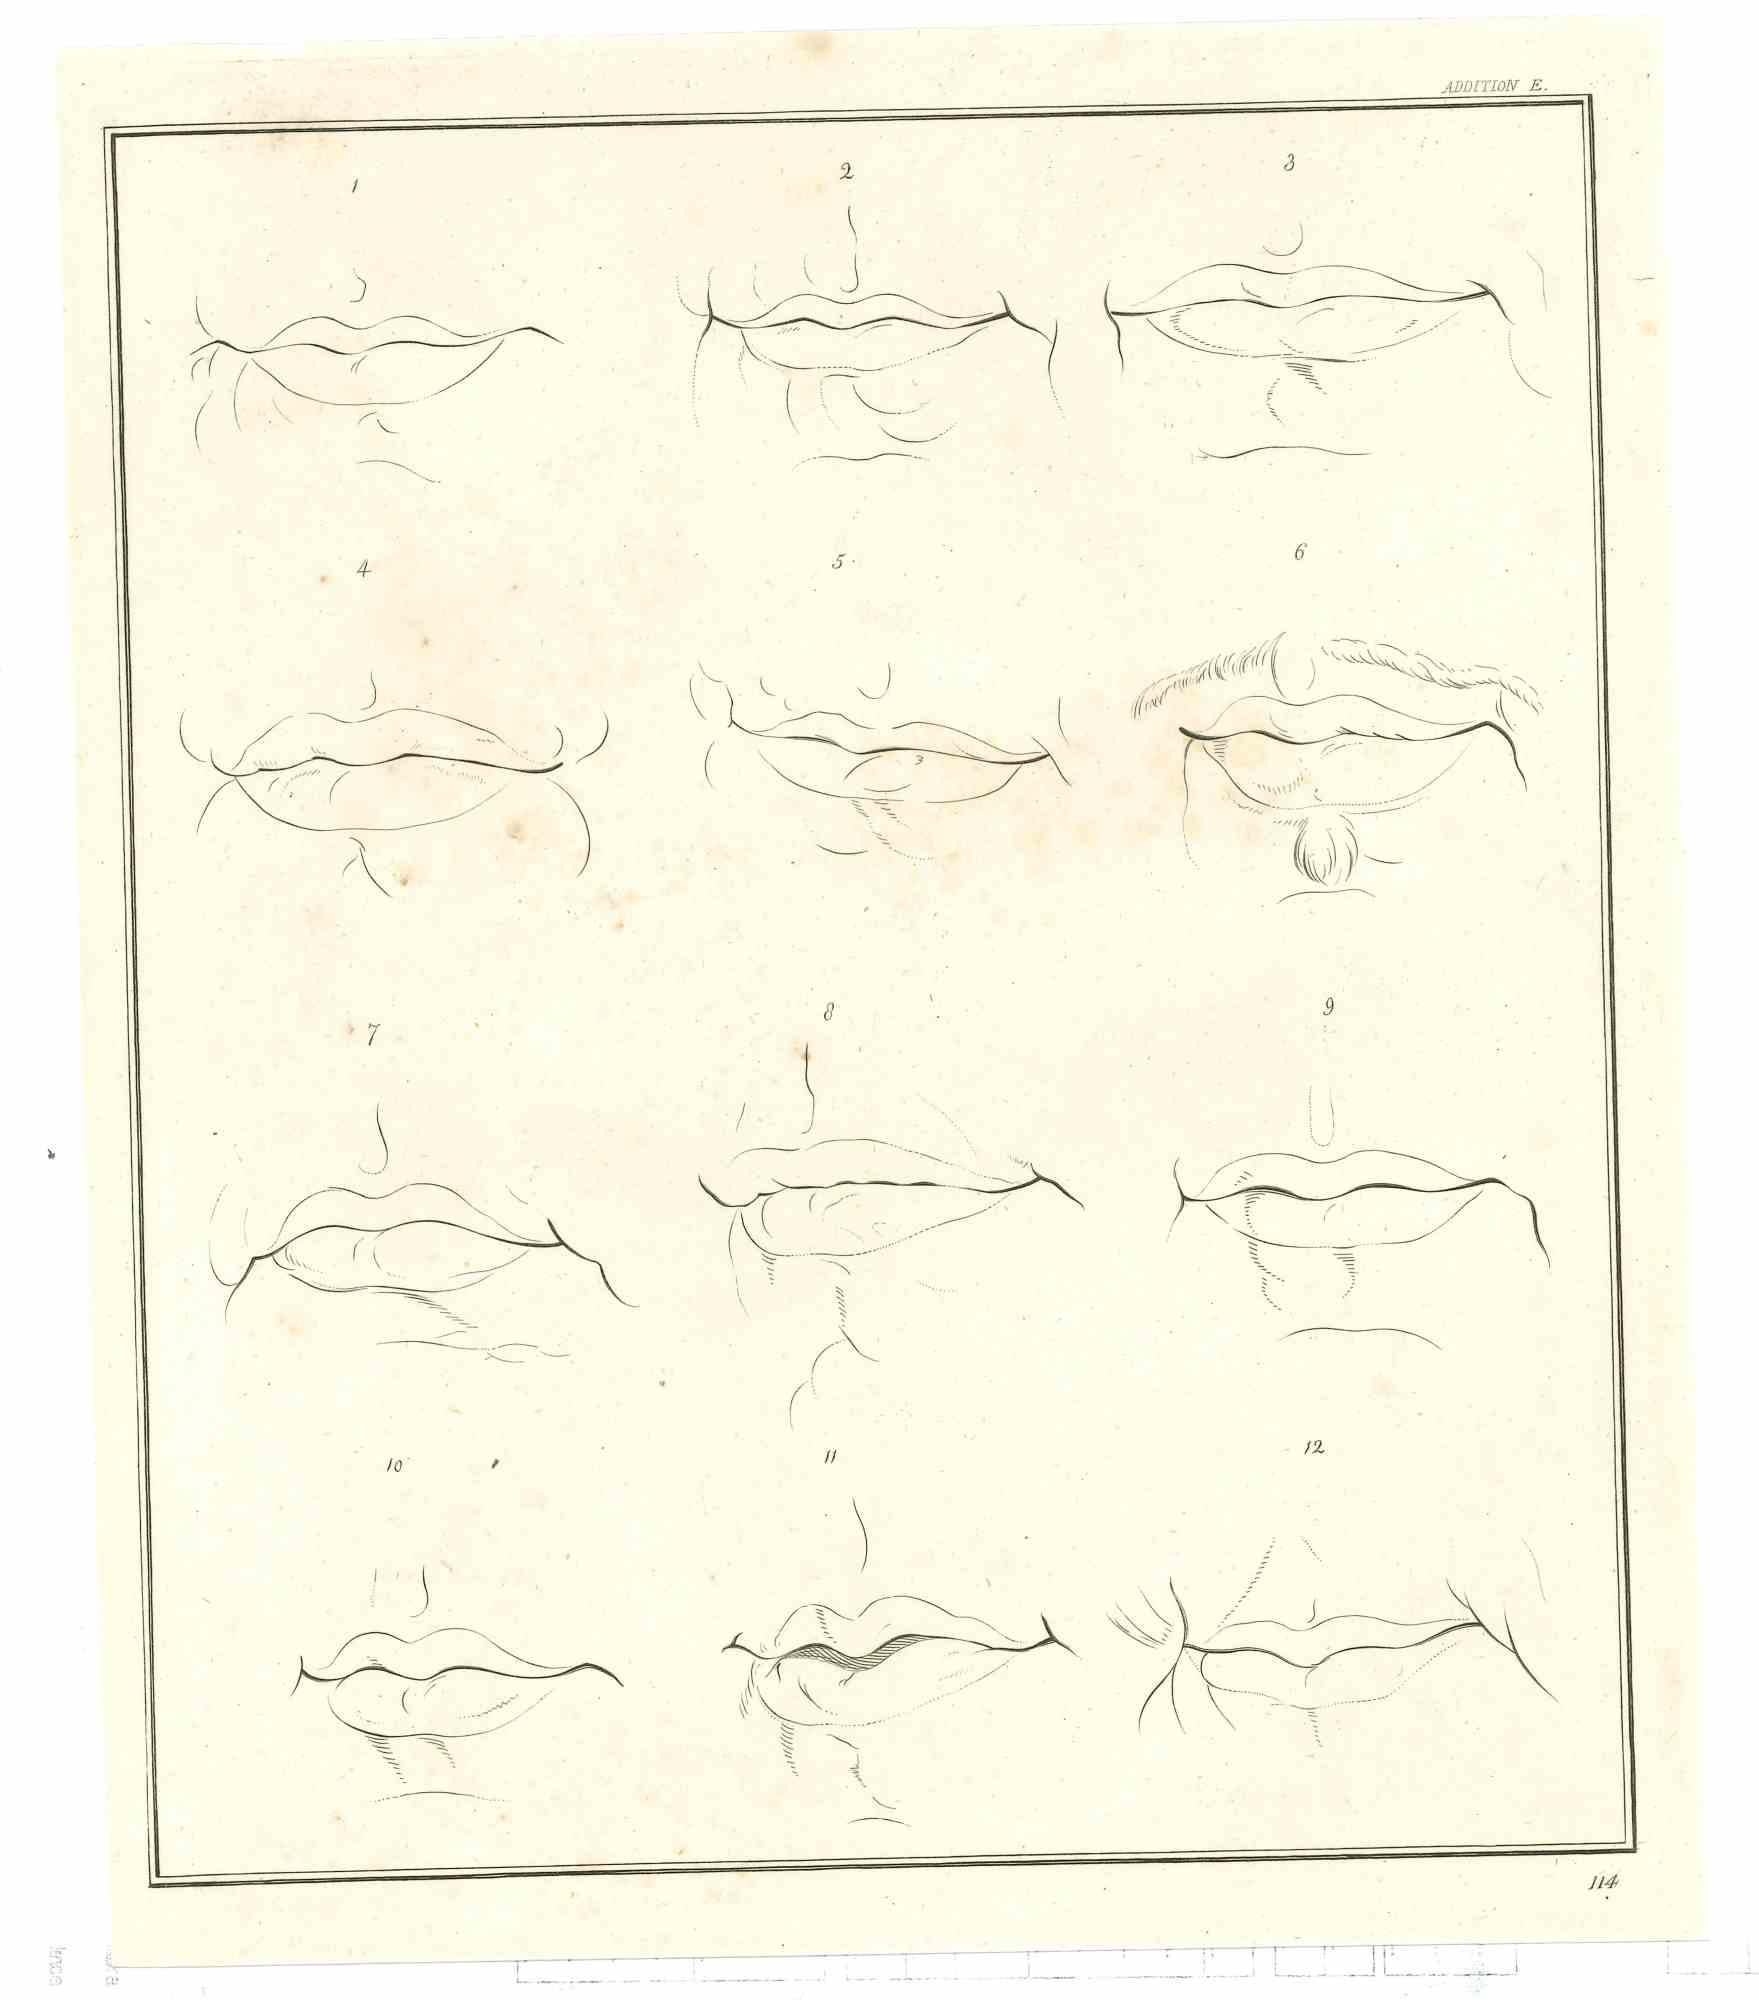 The Physiognomy - Lips is an original etching artwork realized by Thomas Holloway for Johann Caspar Lavater's "Essays on Physiognomy, Designed to Promote the Knowledge and the Love of Mankind", London, Bensley, 1810. 

Good conditions with minor